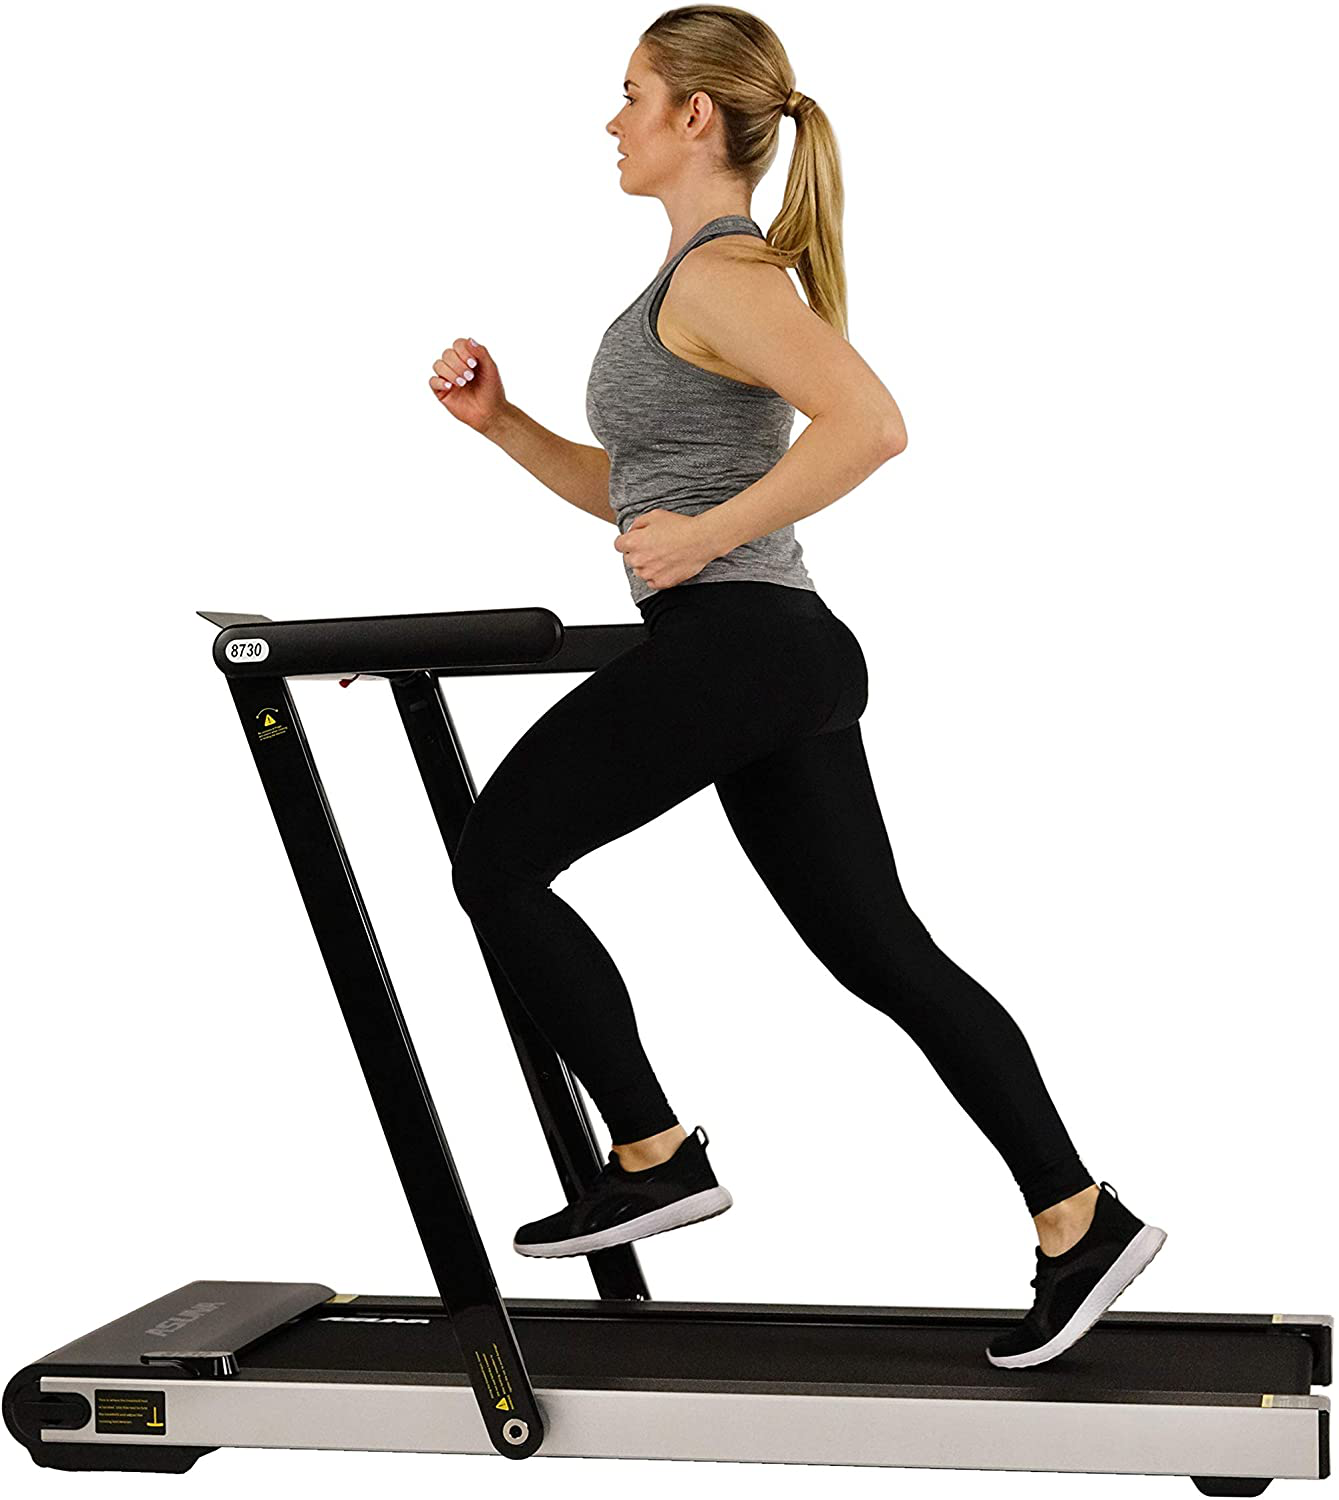 Sunny Health & Fitness ASUNA Premium Slim Folding Treadmill Running Machine with Speakers for Home Gyms Animals & Pet Supplies > Pet Supplies > Dog Supplies > Dog Treadmills Sunny Health & Fitness 8730  